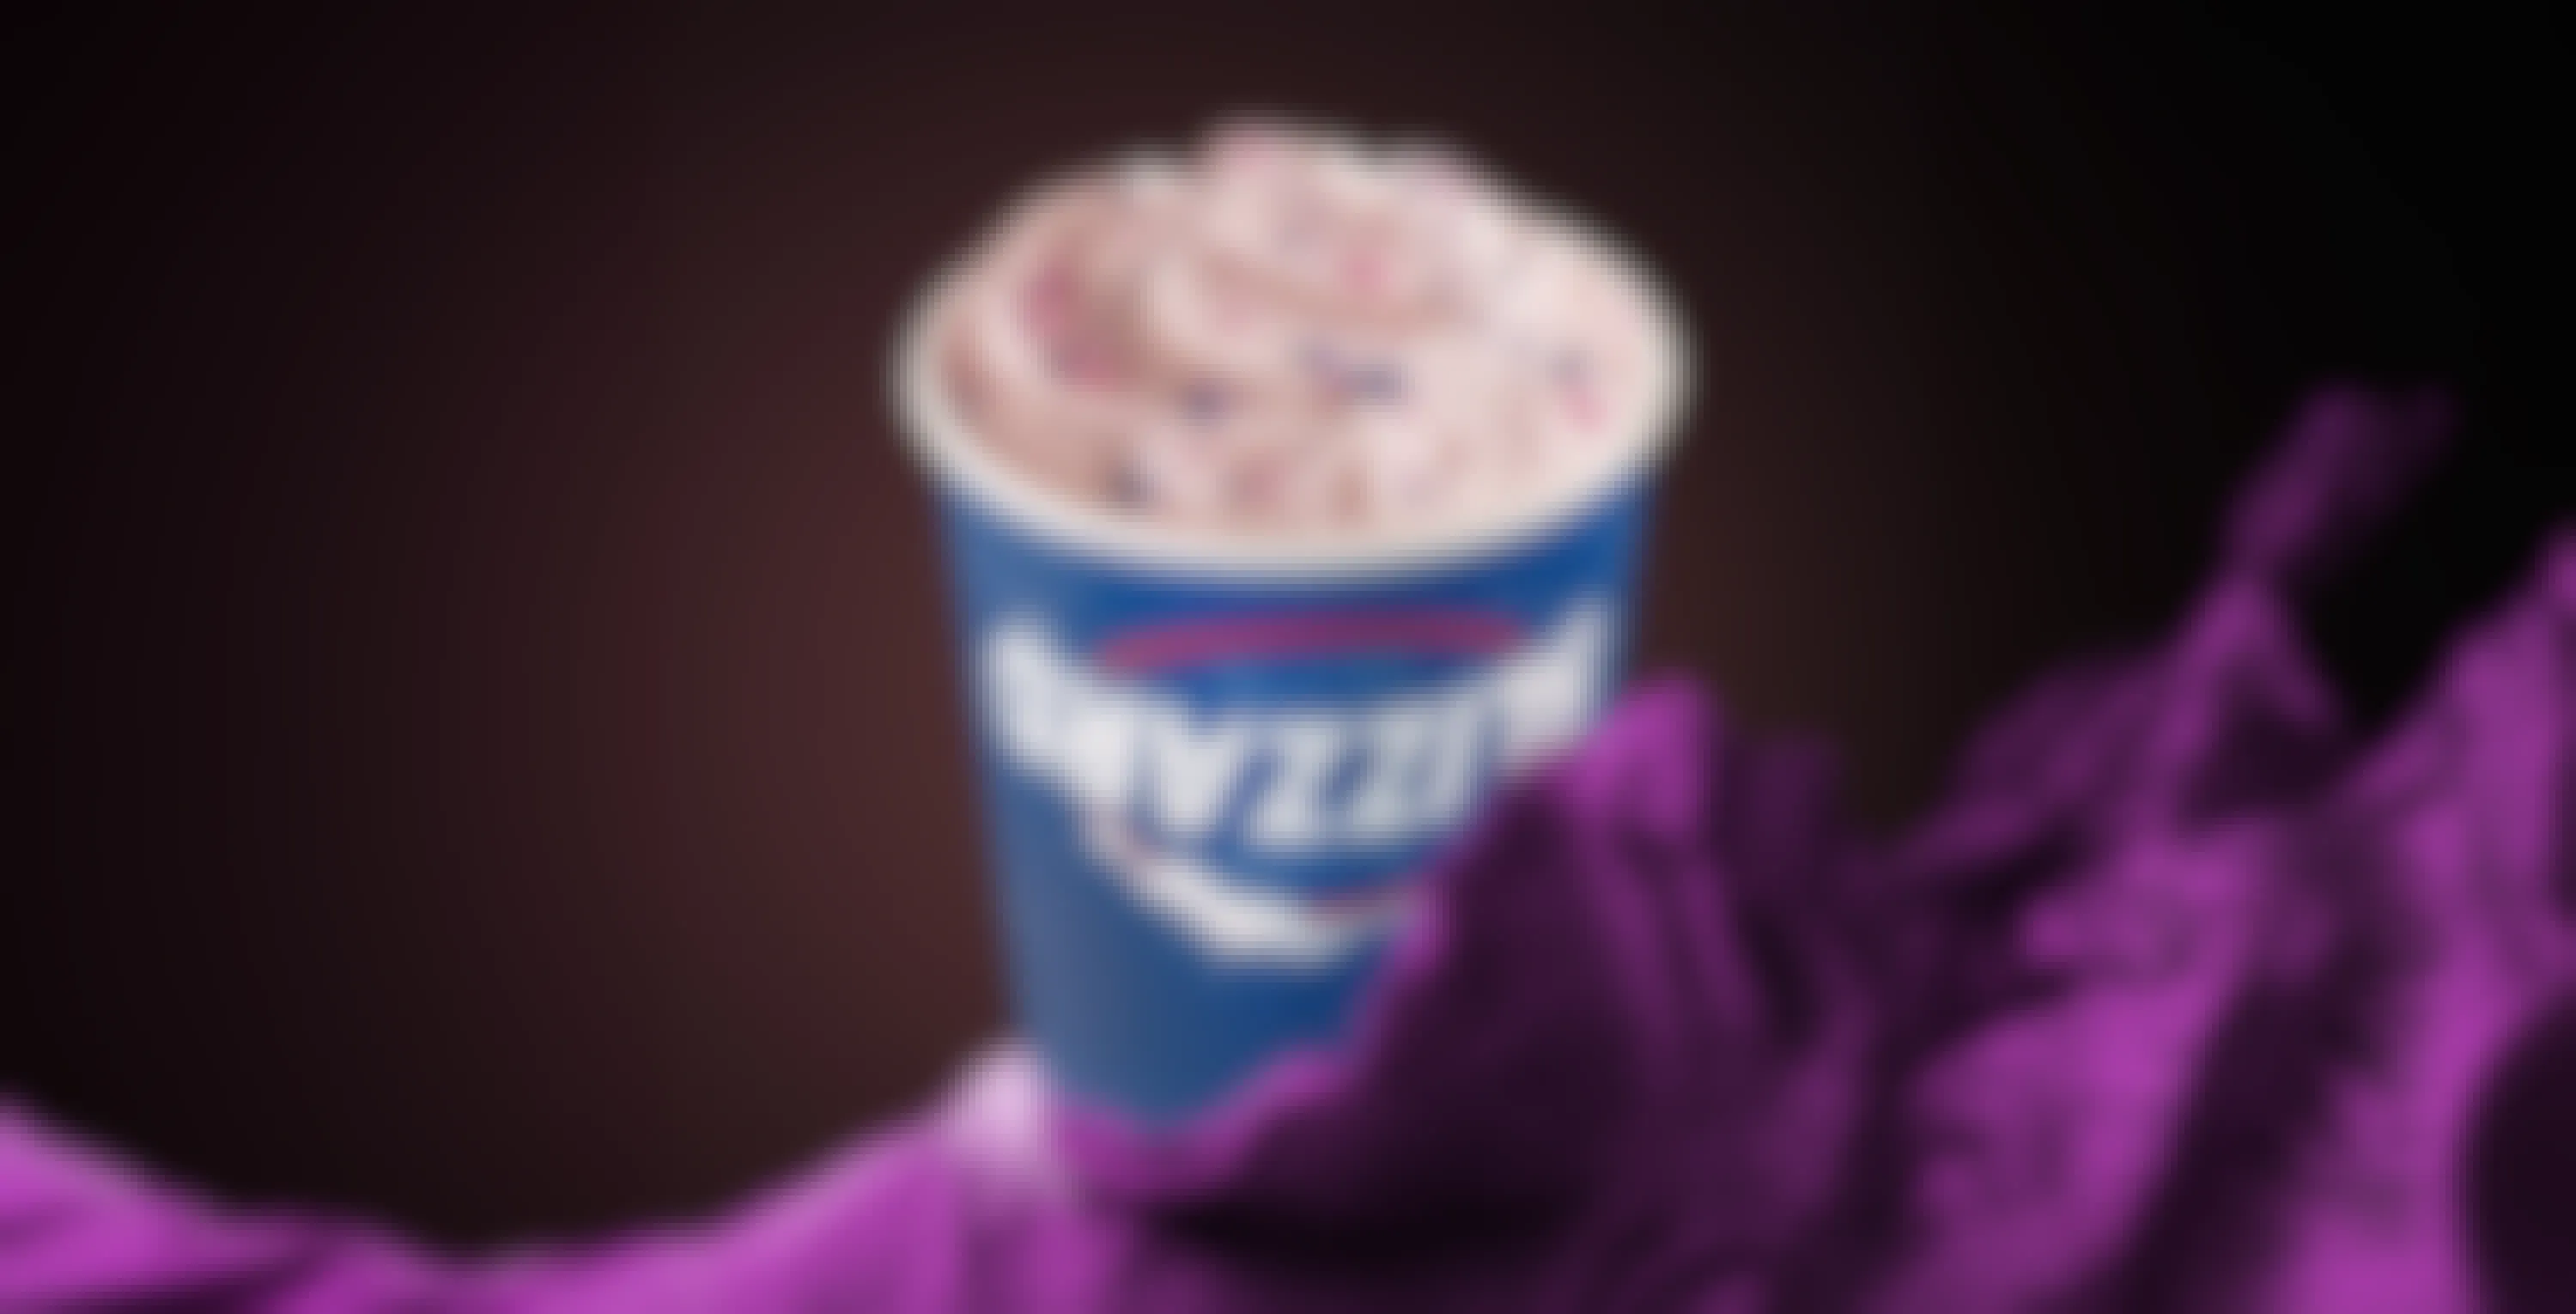 What's the Deal With the Taylor Swift Blizzard at Dairy Queen?